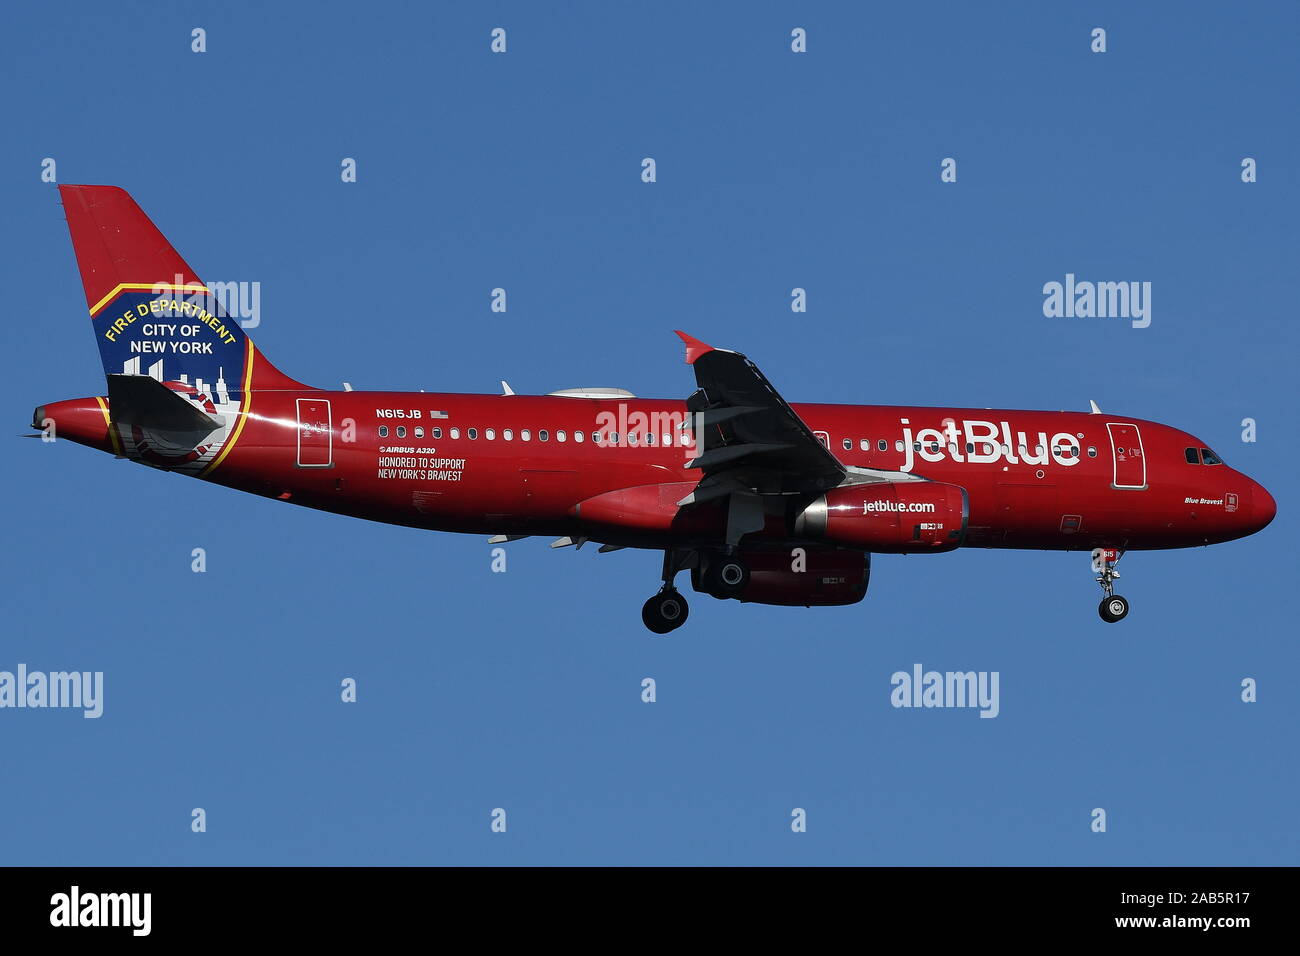 JETBLUE AIRBUS A320 IN MARKINGS HONORING CITY OF NEW YORK FIRE DEPARTMENT Stock Photo